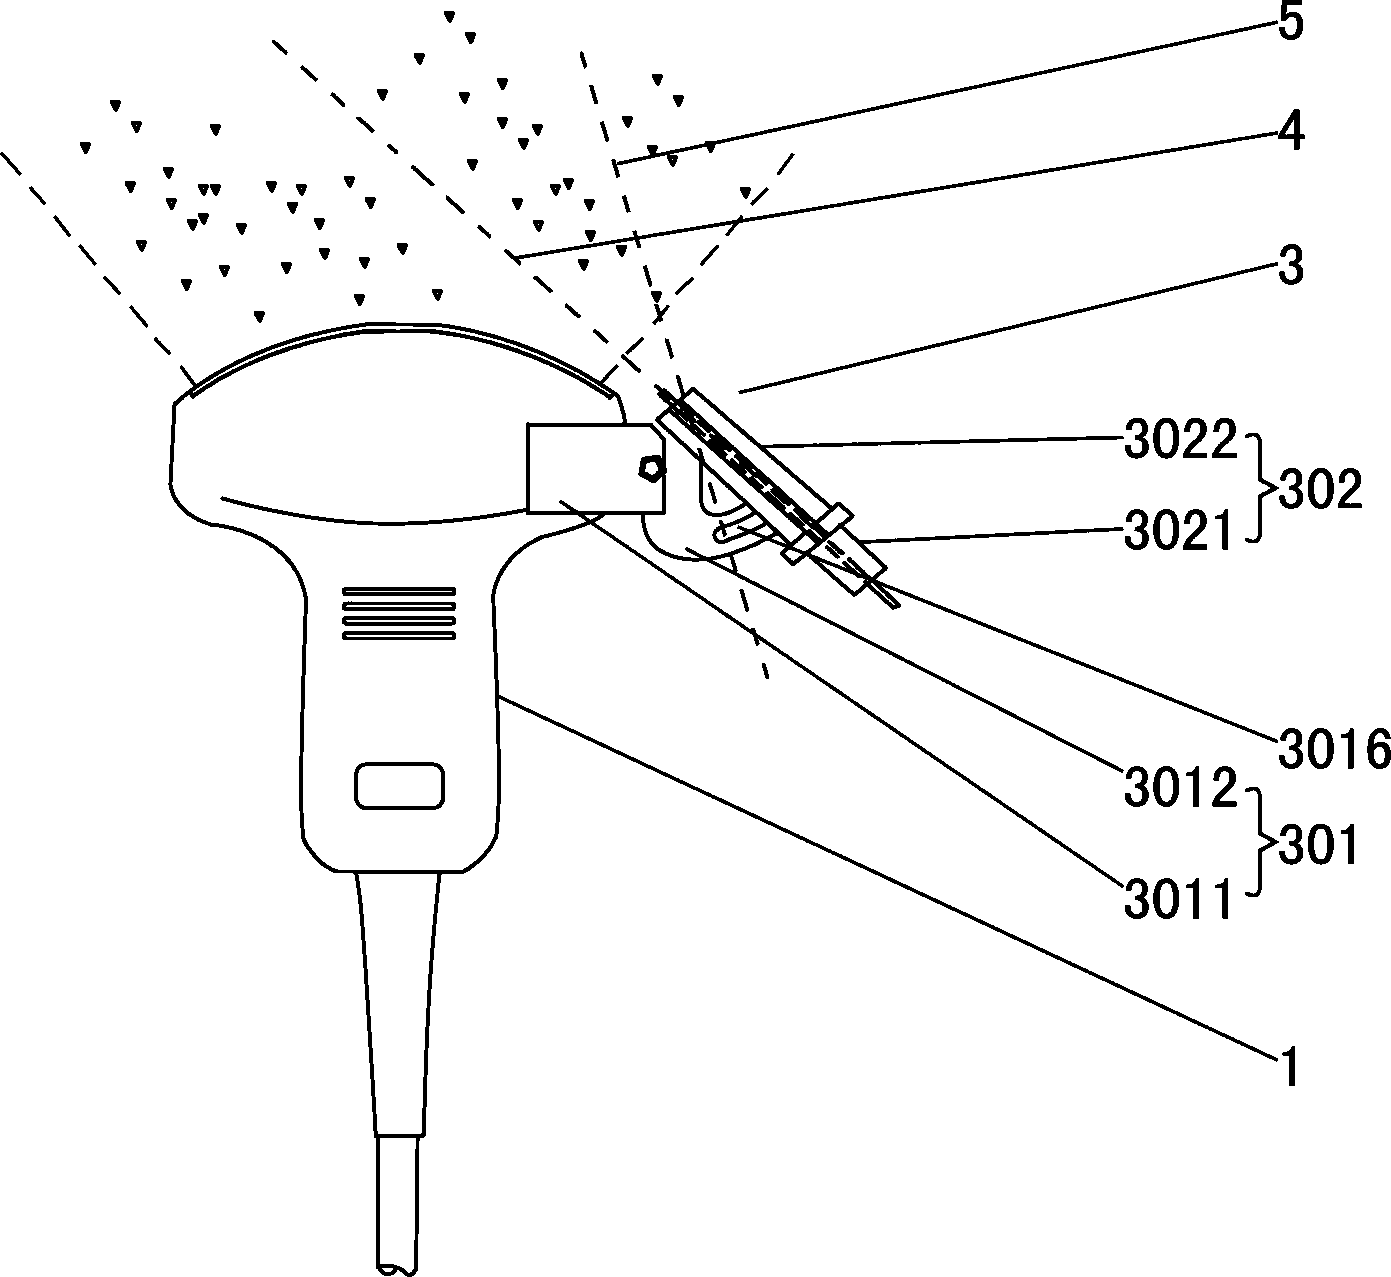 Ultrasonic-Doppler-effect positioning puncturing device for vessel